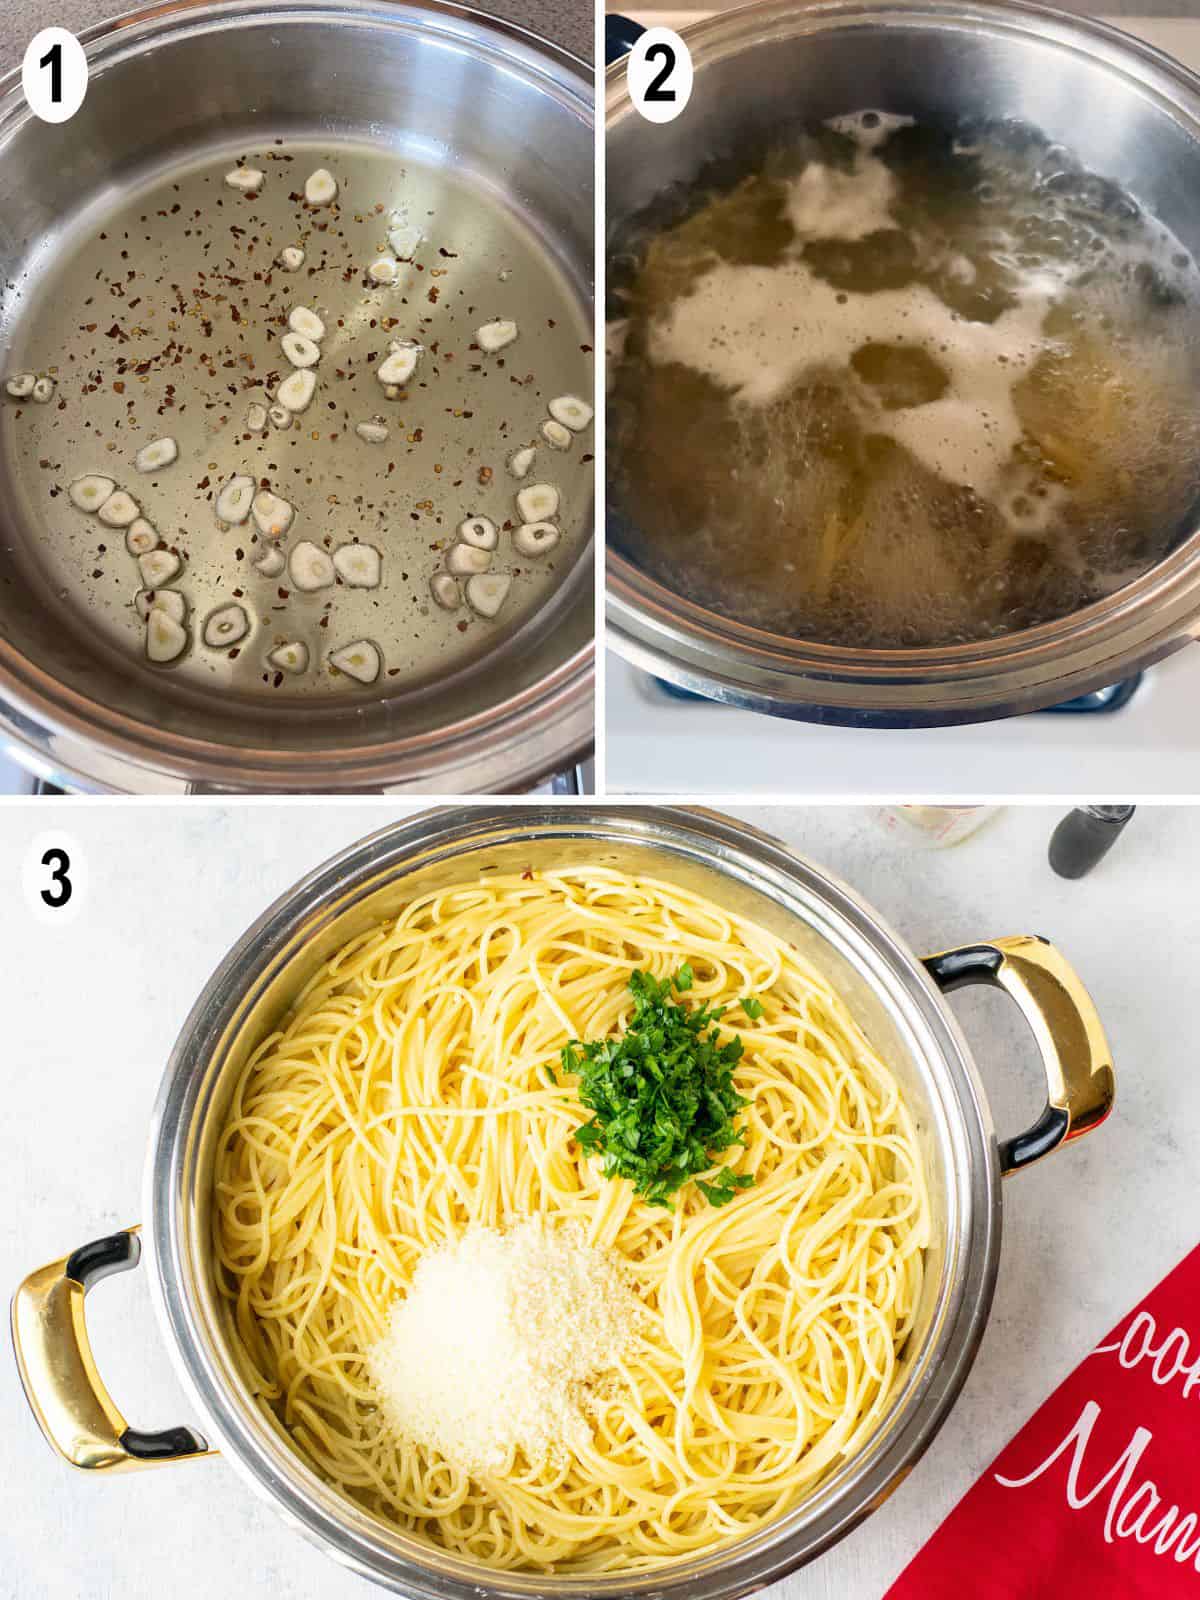 garlic, pepper flakes, oil. spaghetti boiling. cooked spaghetti with cheese and parsley.